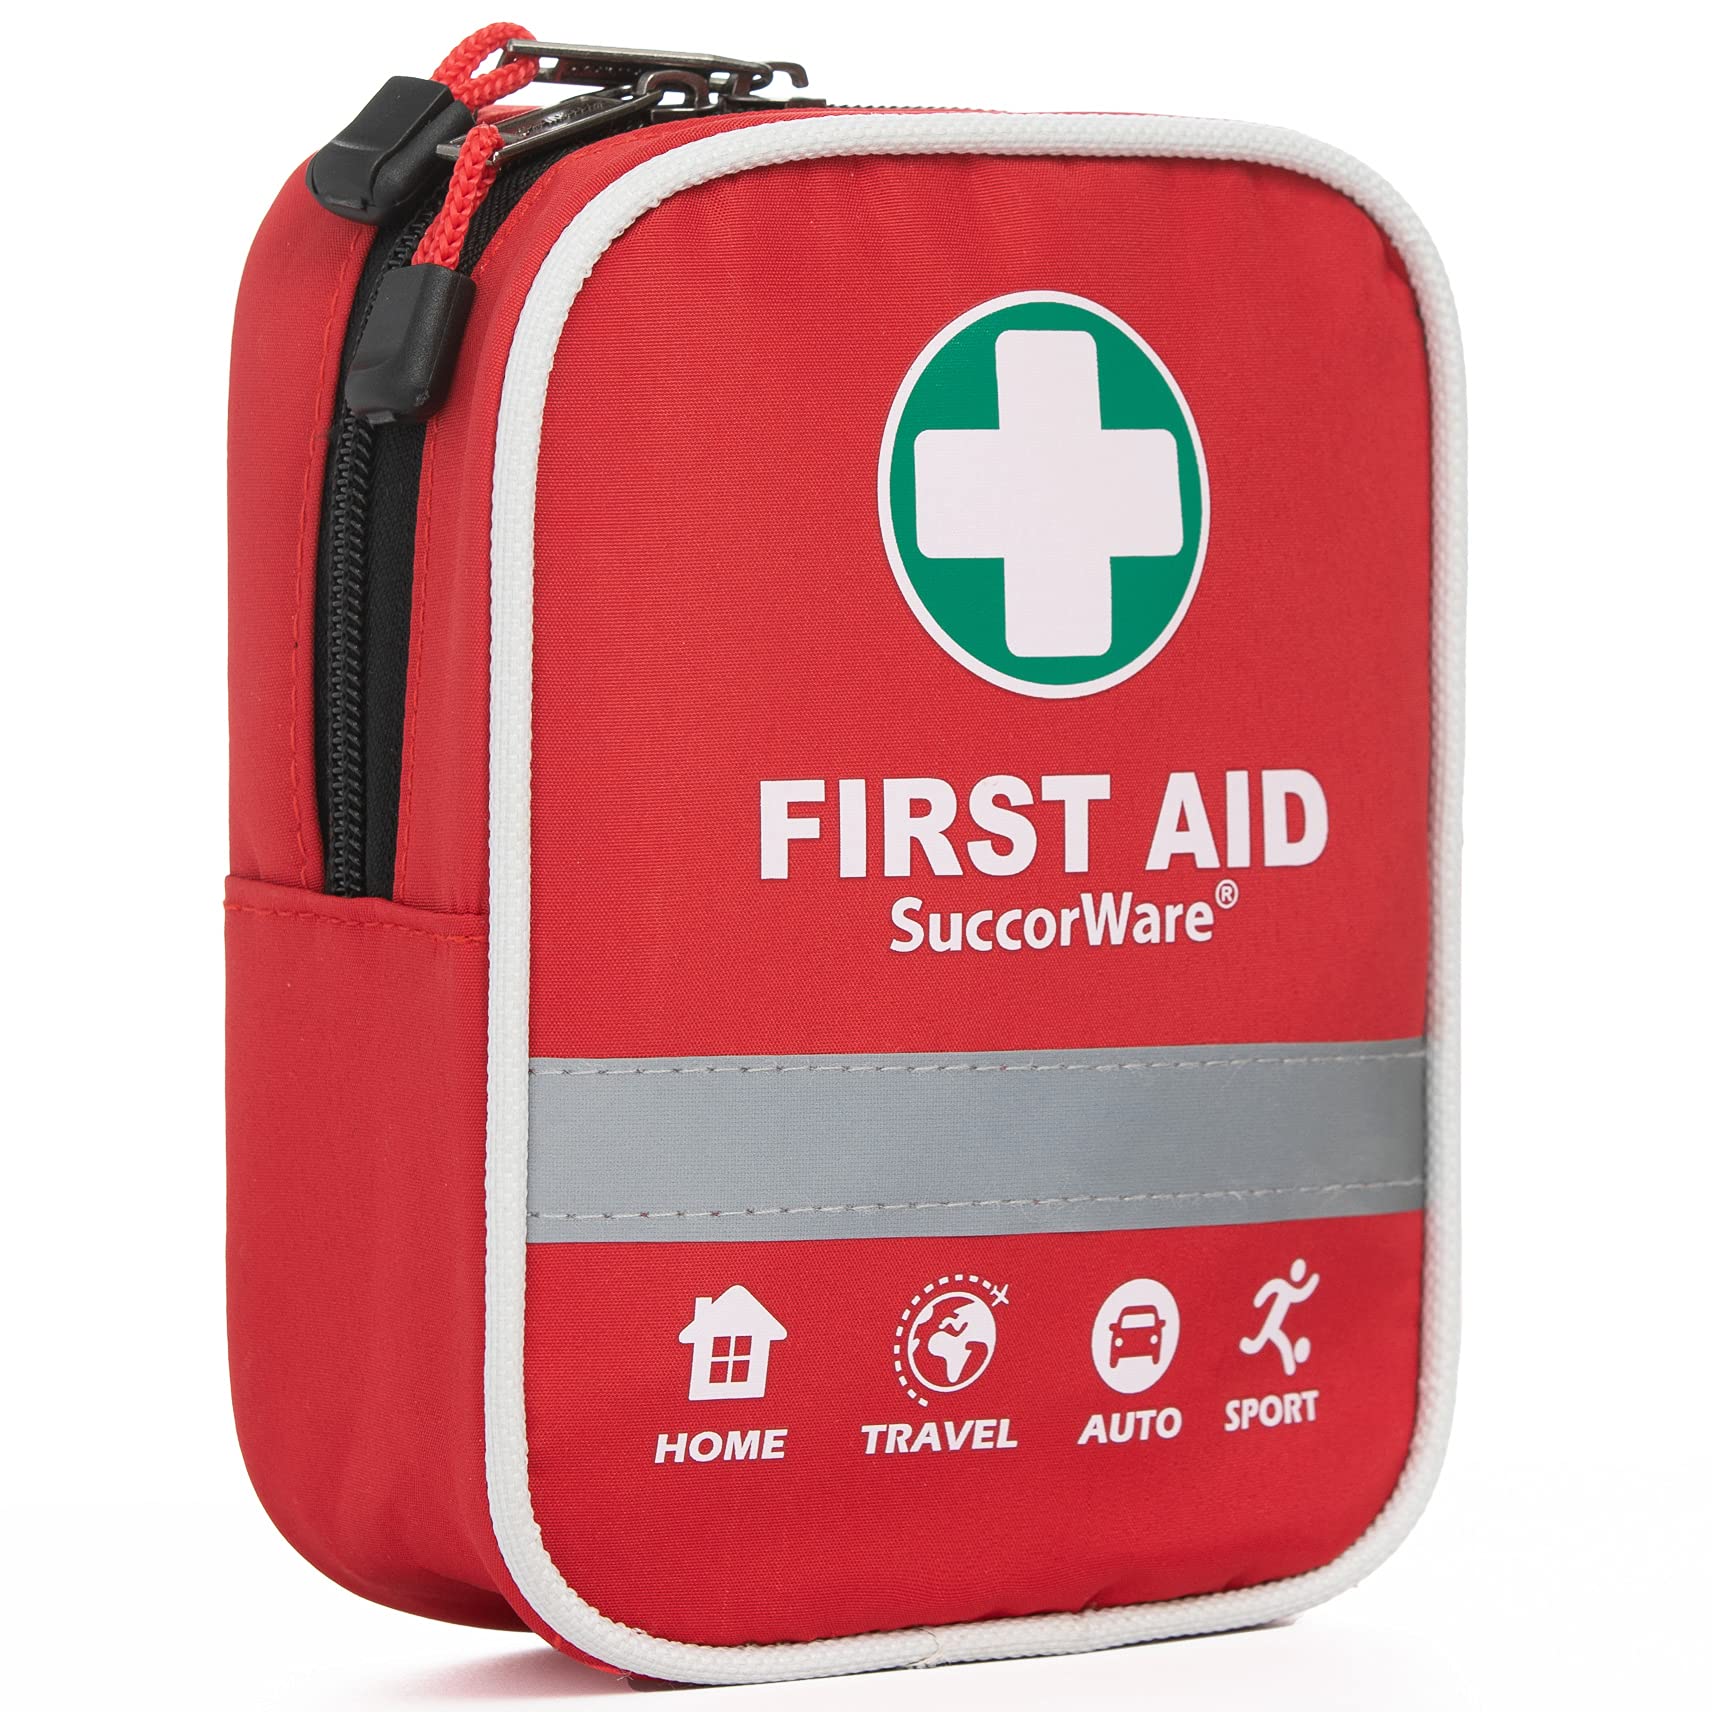 130 Pieces First Aid Kit with Hospital Grade Medical Supplies - Includes Emergency Blanket, Bandage - Great for Home, Outdoors, Office, Car, Travel, Camping, Hiking, Boating